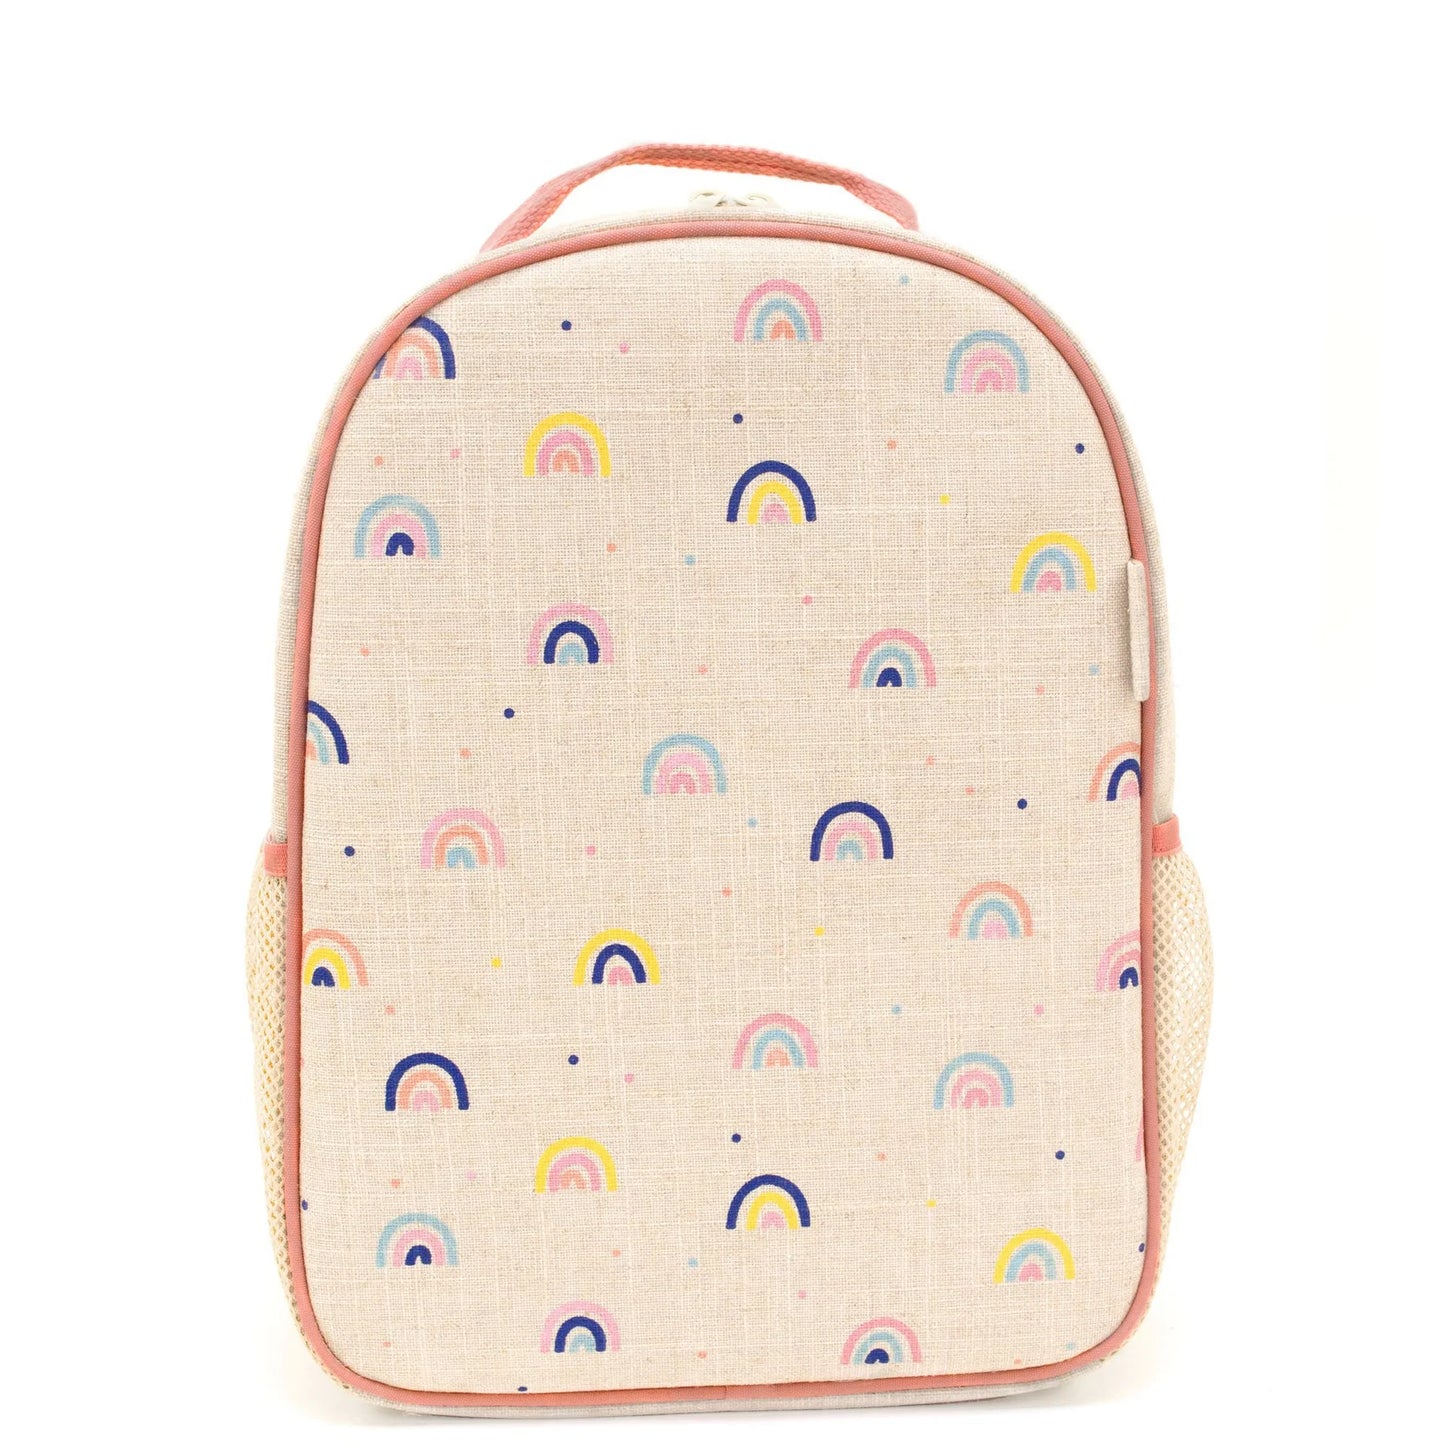 SoYoung Kids Backpack